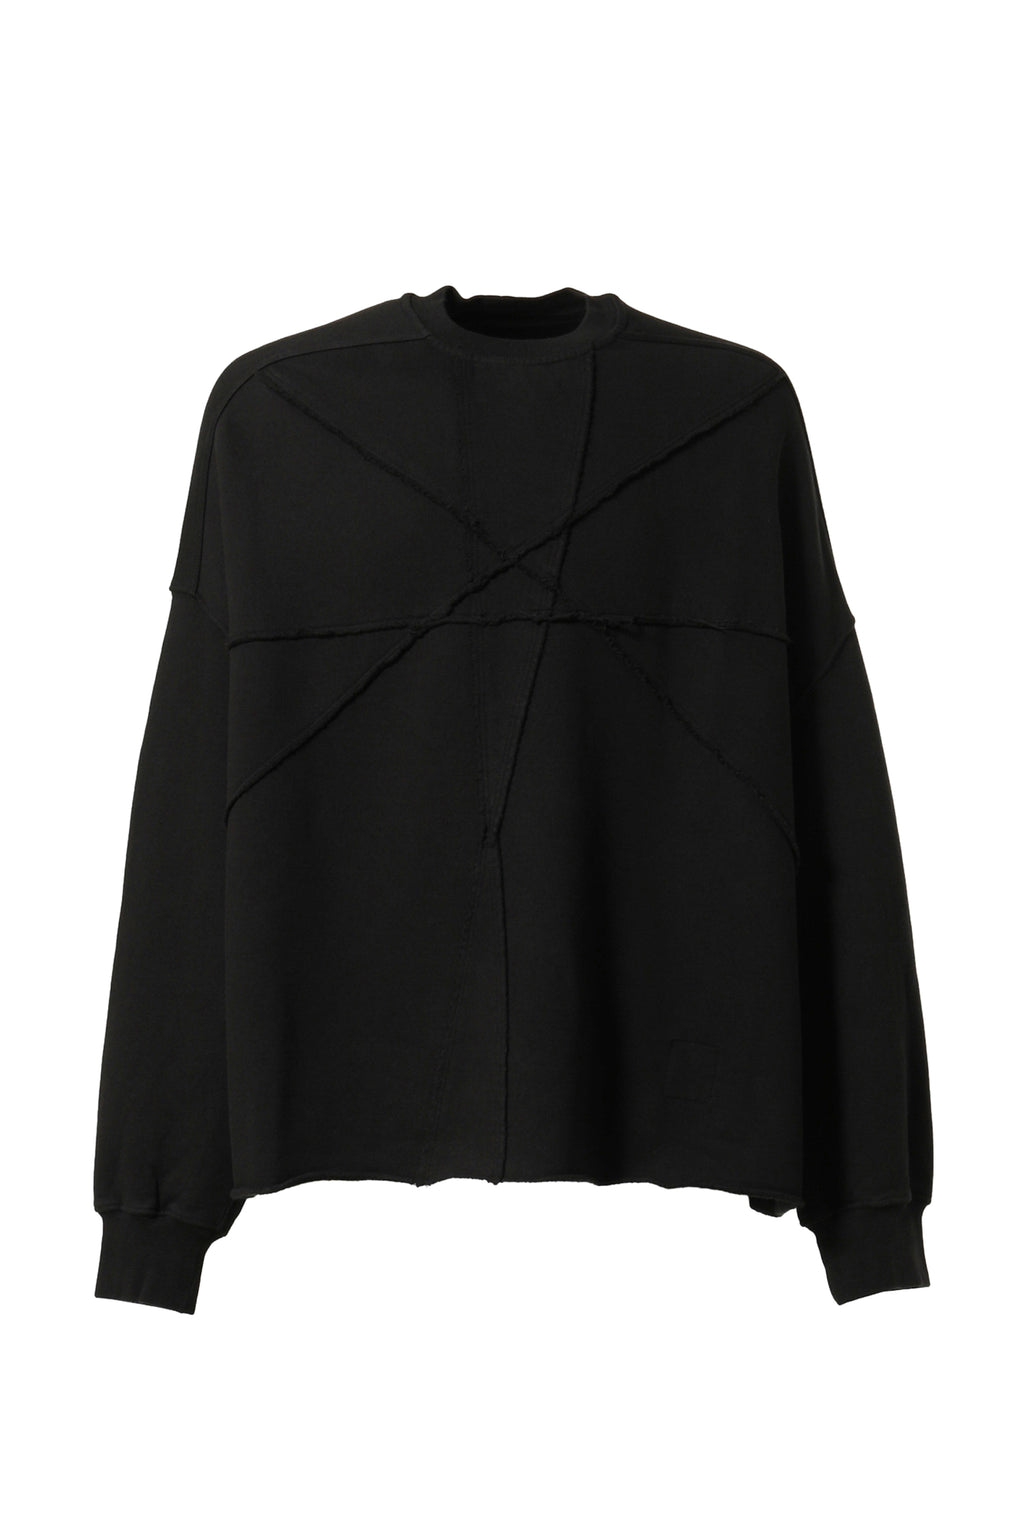 RICK OWENS DOUBLE LAYERED LONG SLEEVE T-SHIRT DUST FW23